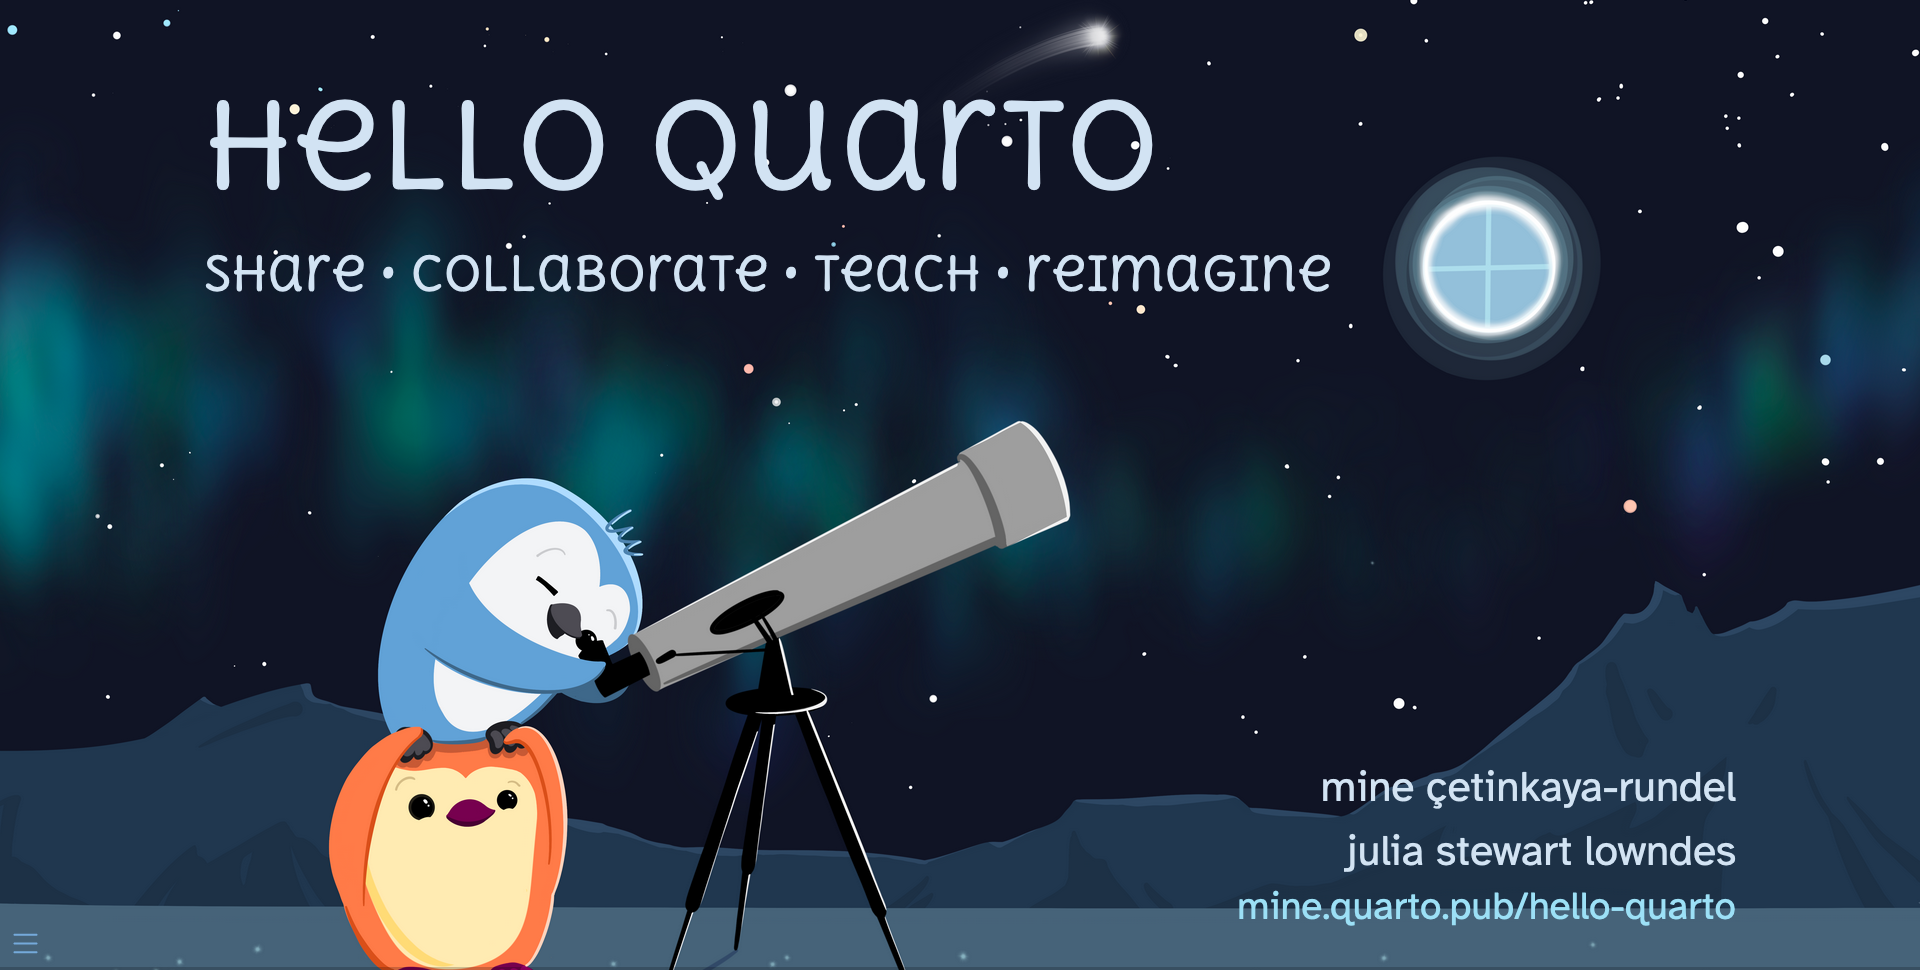 One penguin standing on another penguin's shoulders in a snowscape, looking through a telescope at a Quarto logo “moon” in the night sky.